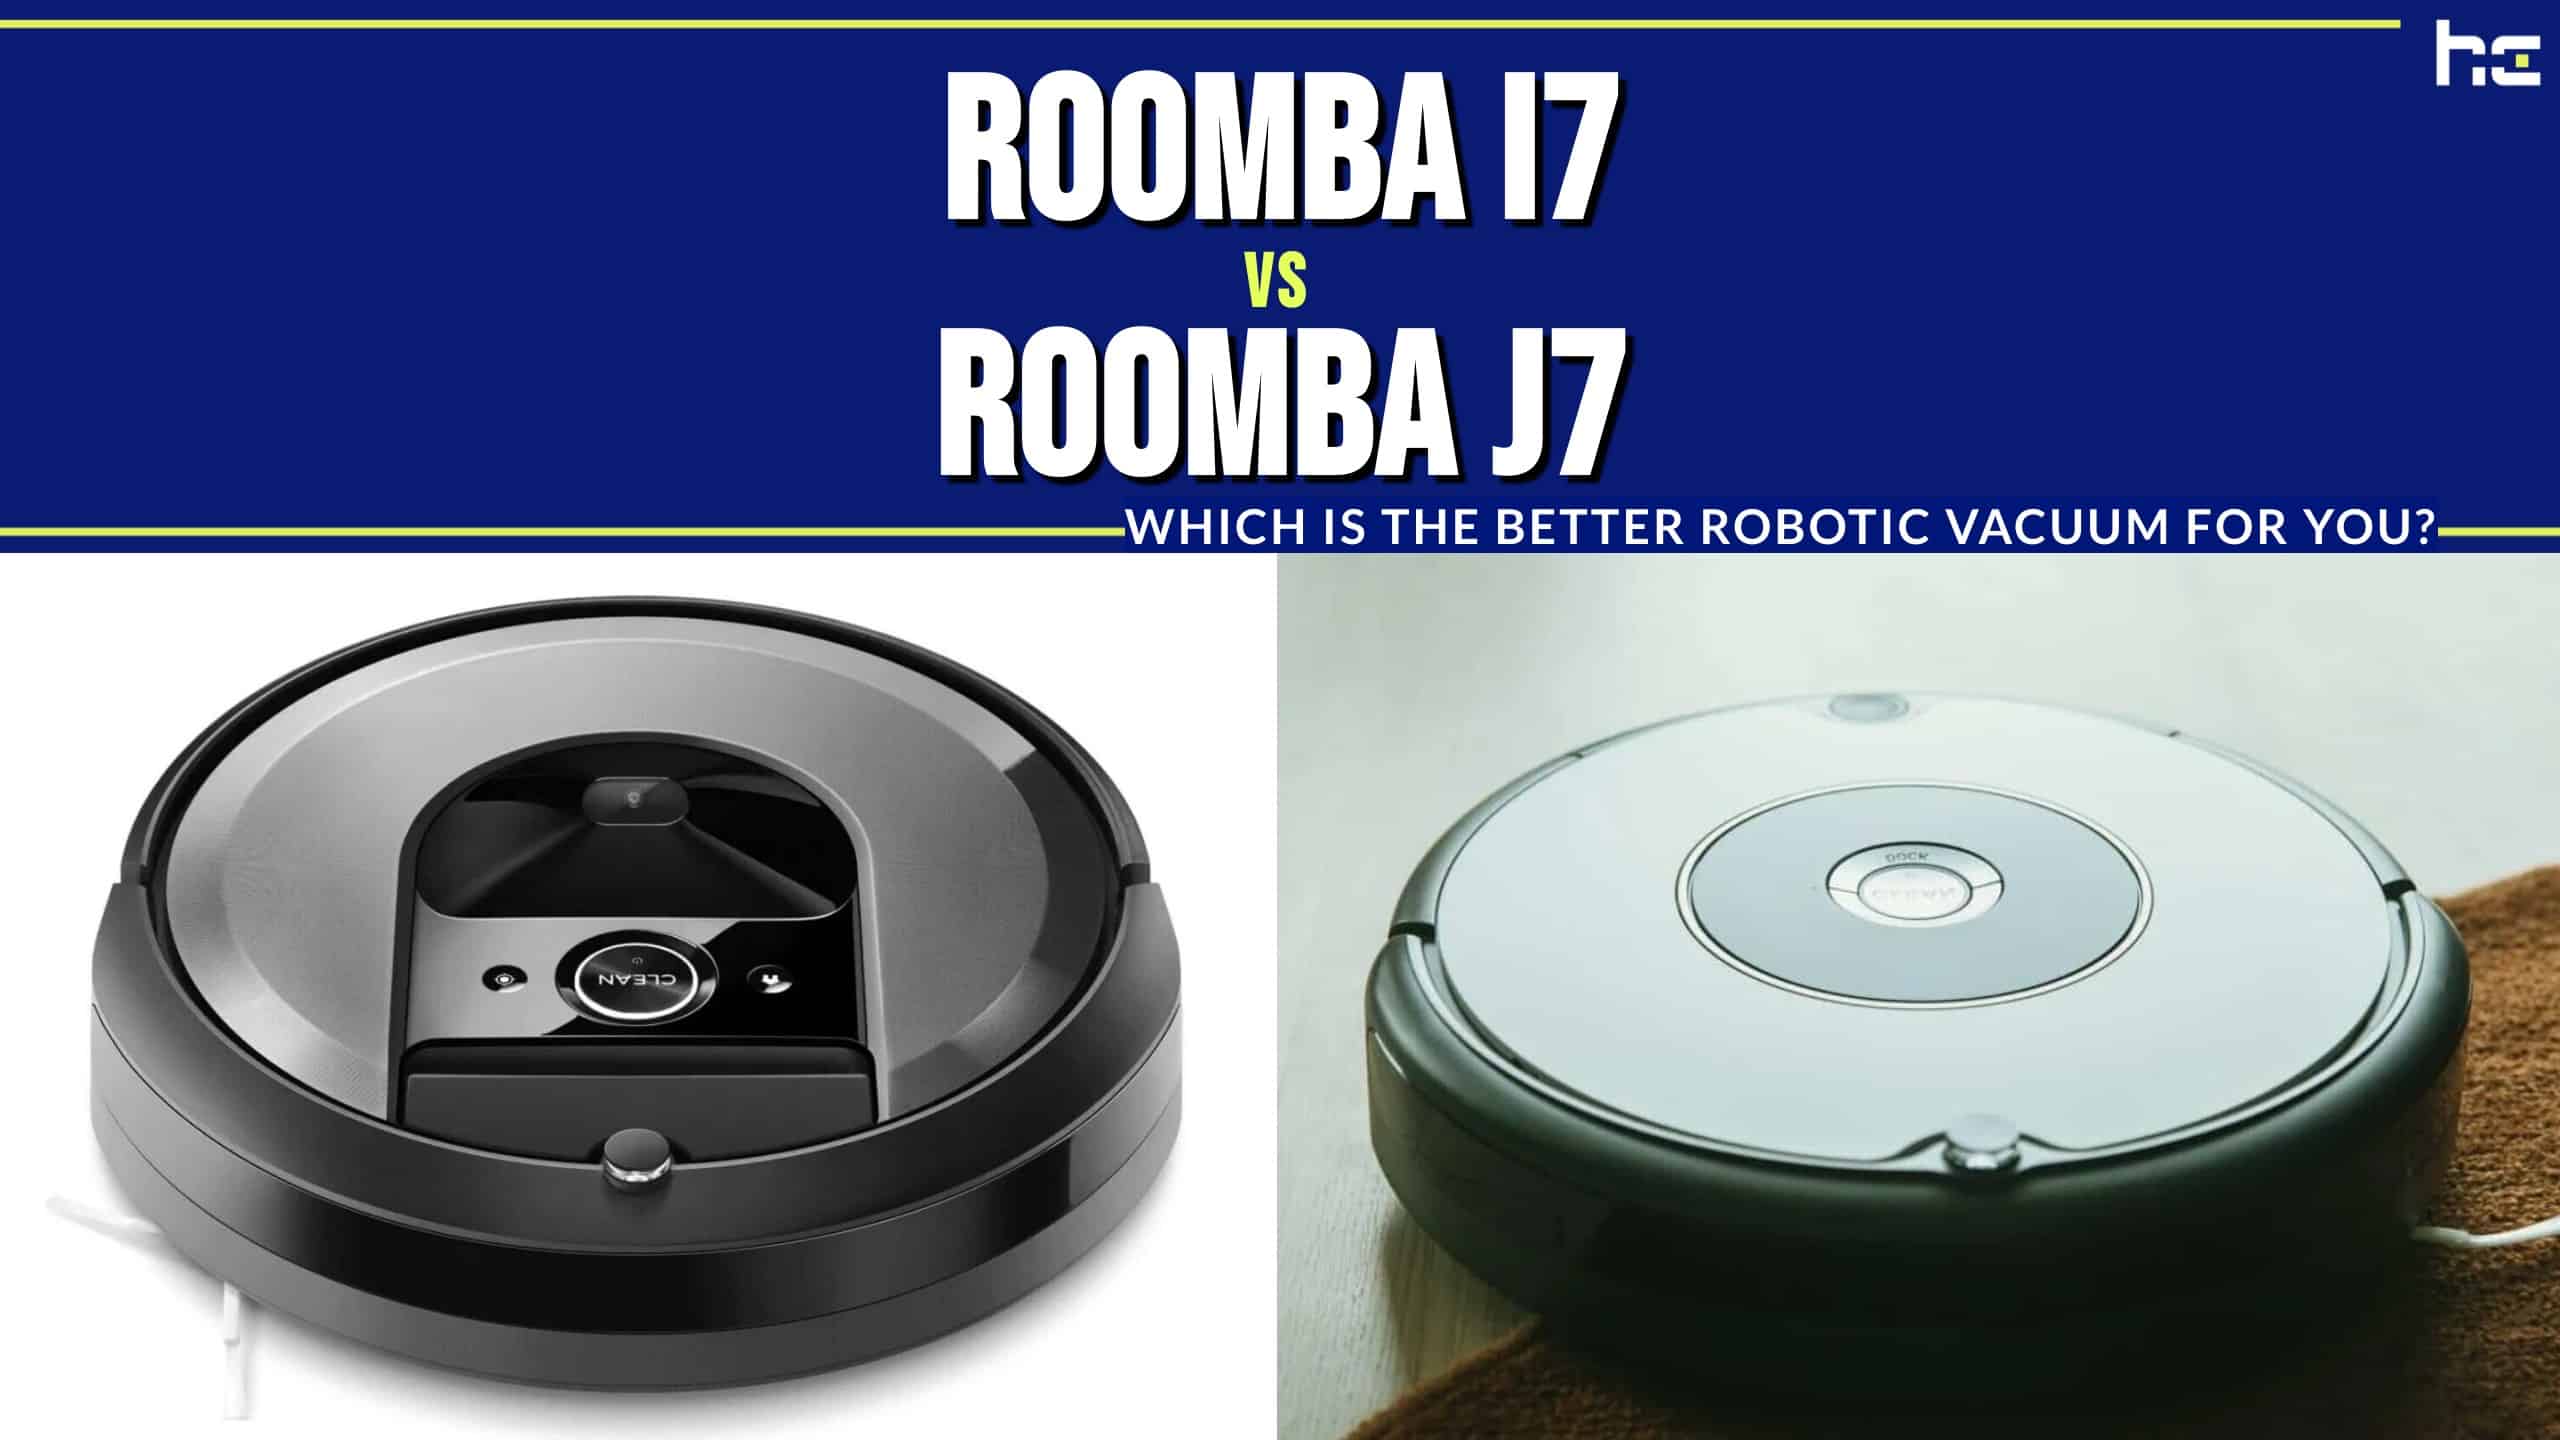 Roomba i7+ vs i8+: The Only Difference You Need to Know